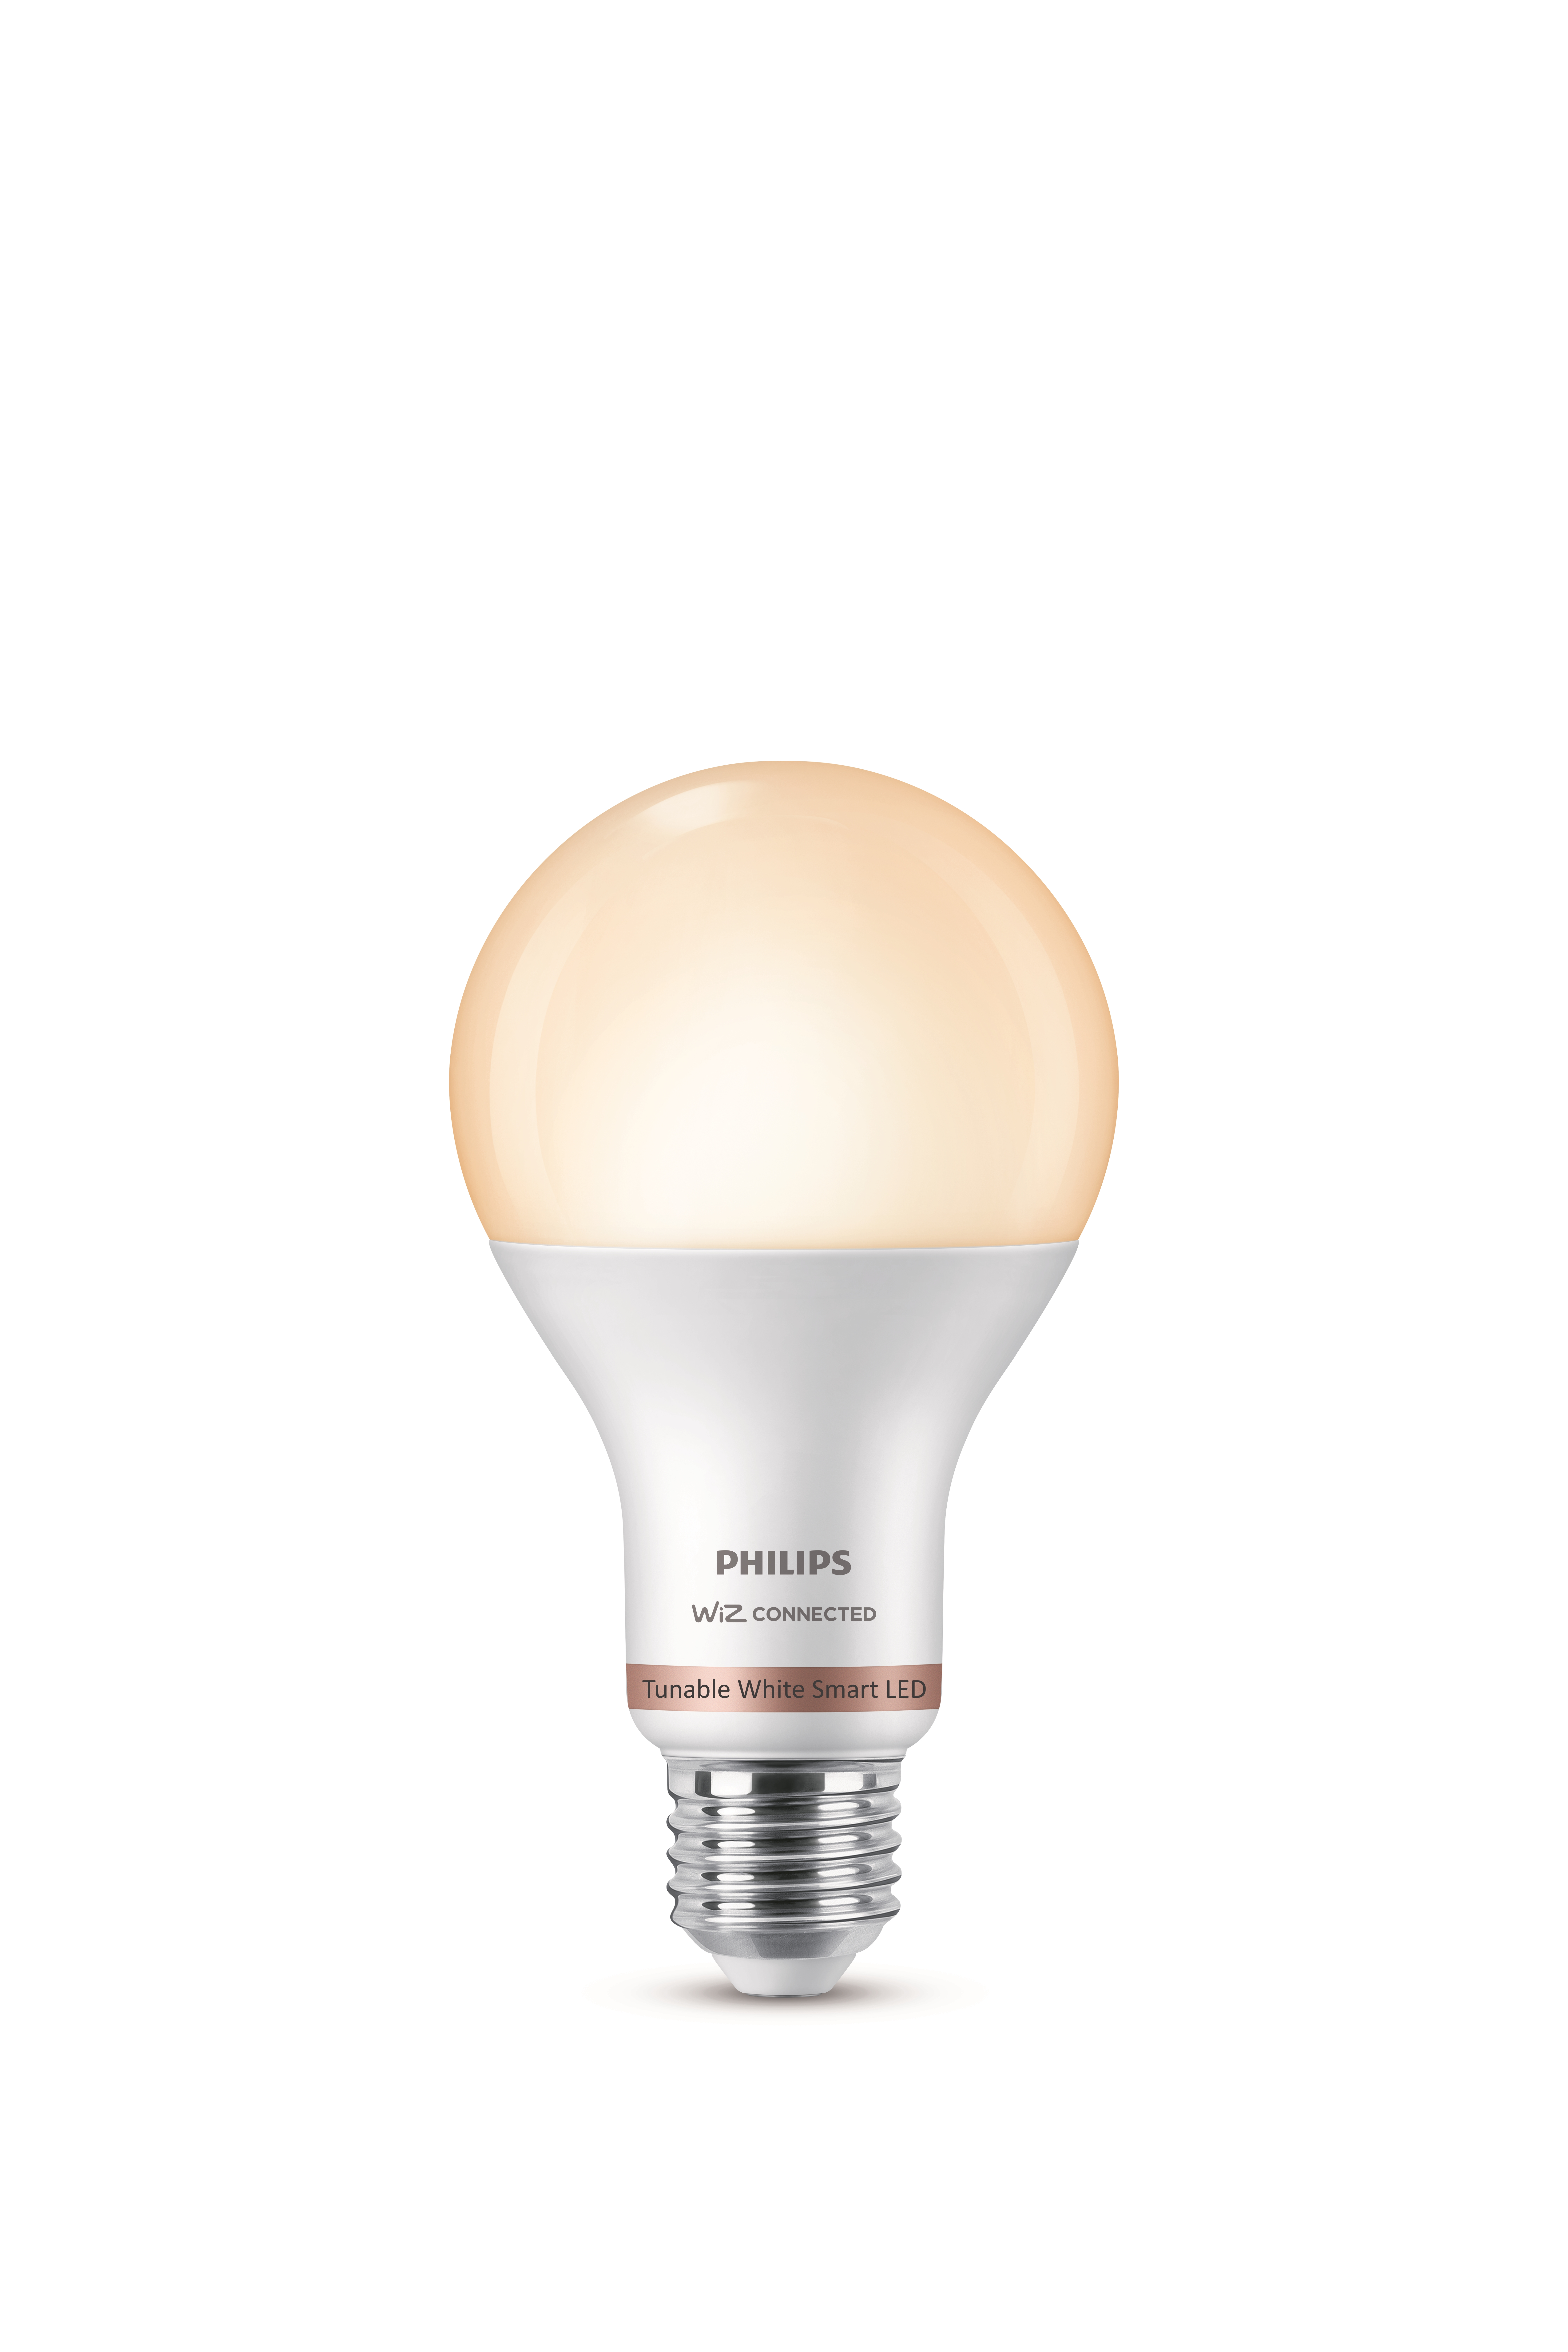 PHILIPS Smart LED E27, WiZ connected, 13 W, 1521 lm, satiniert, dimmbar